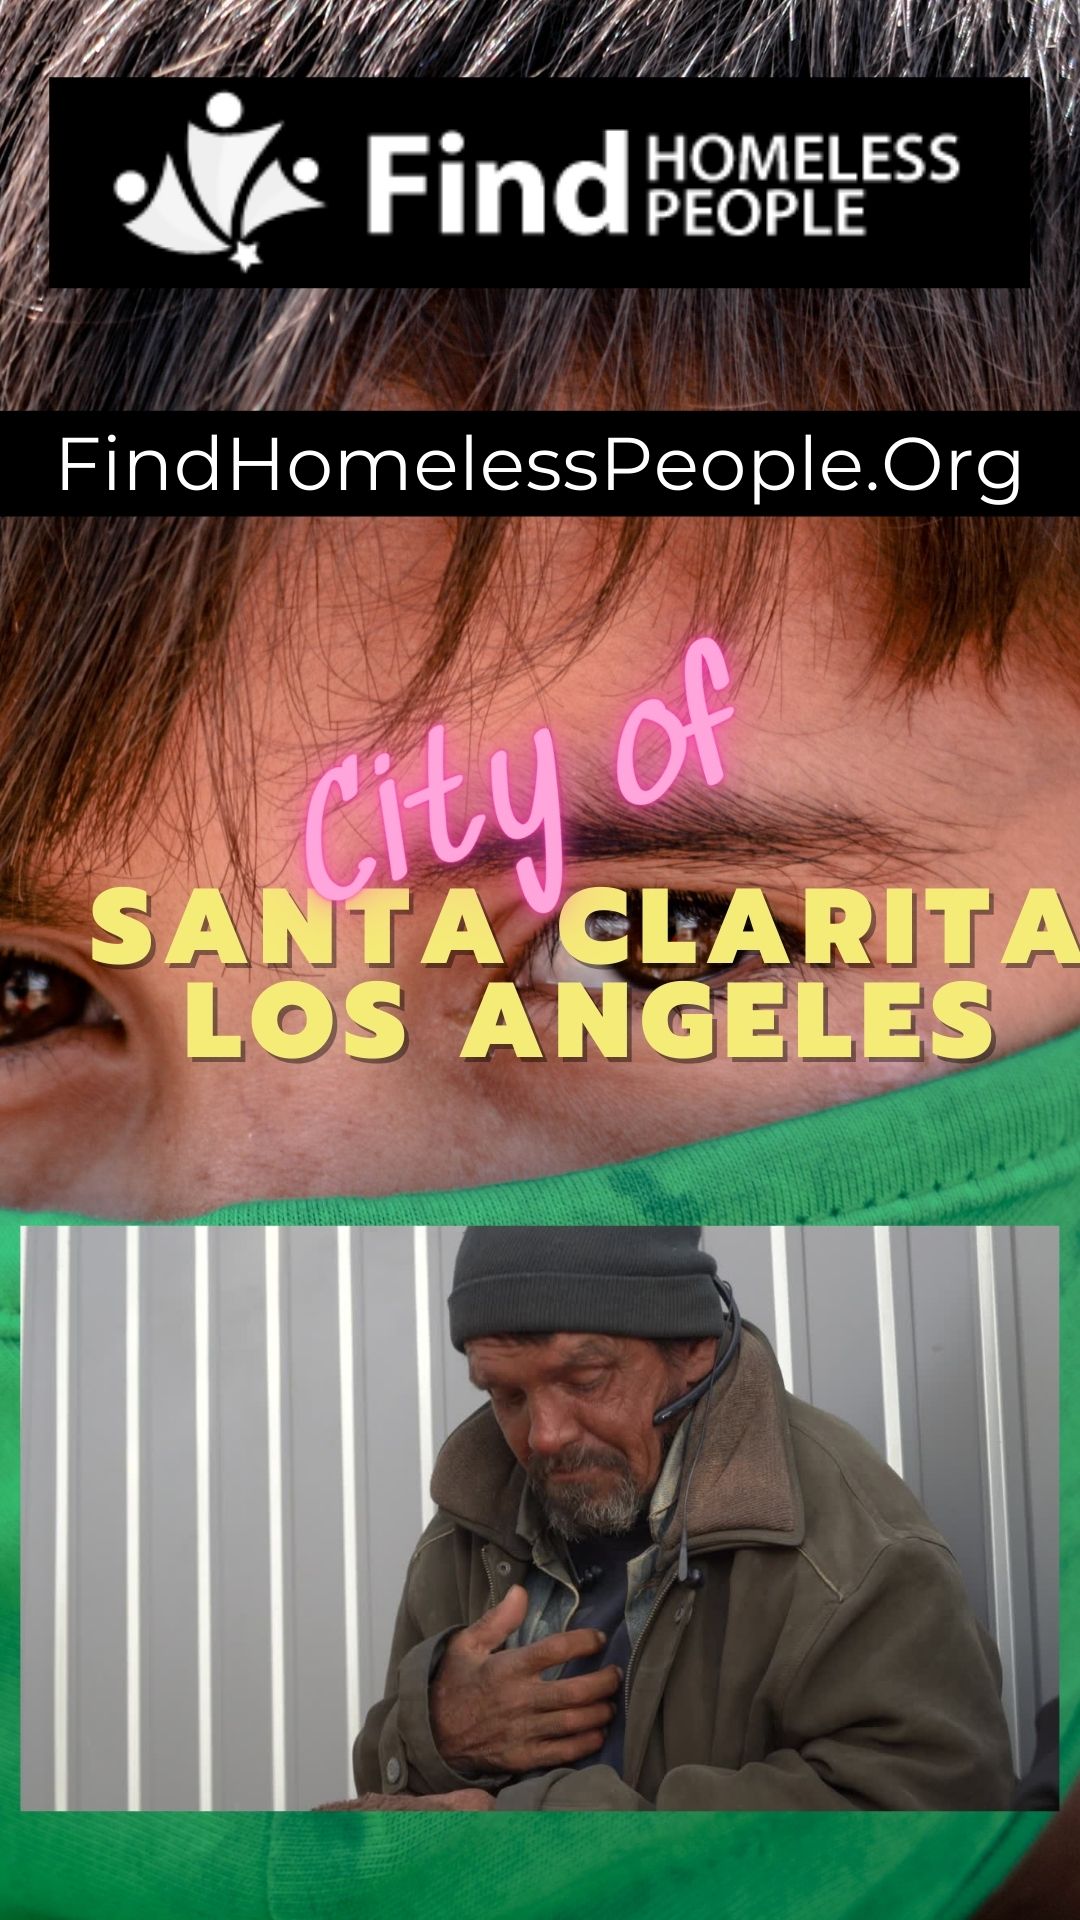 Alhambra Homeless Search